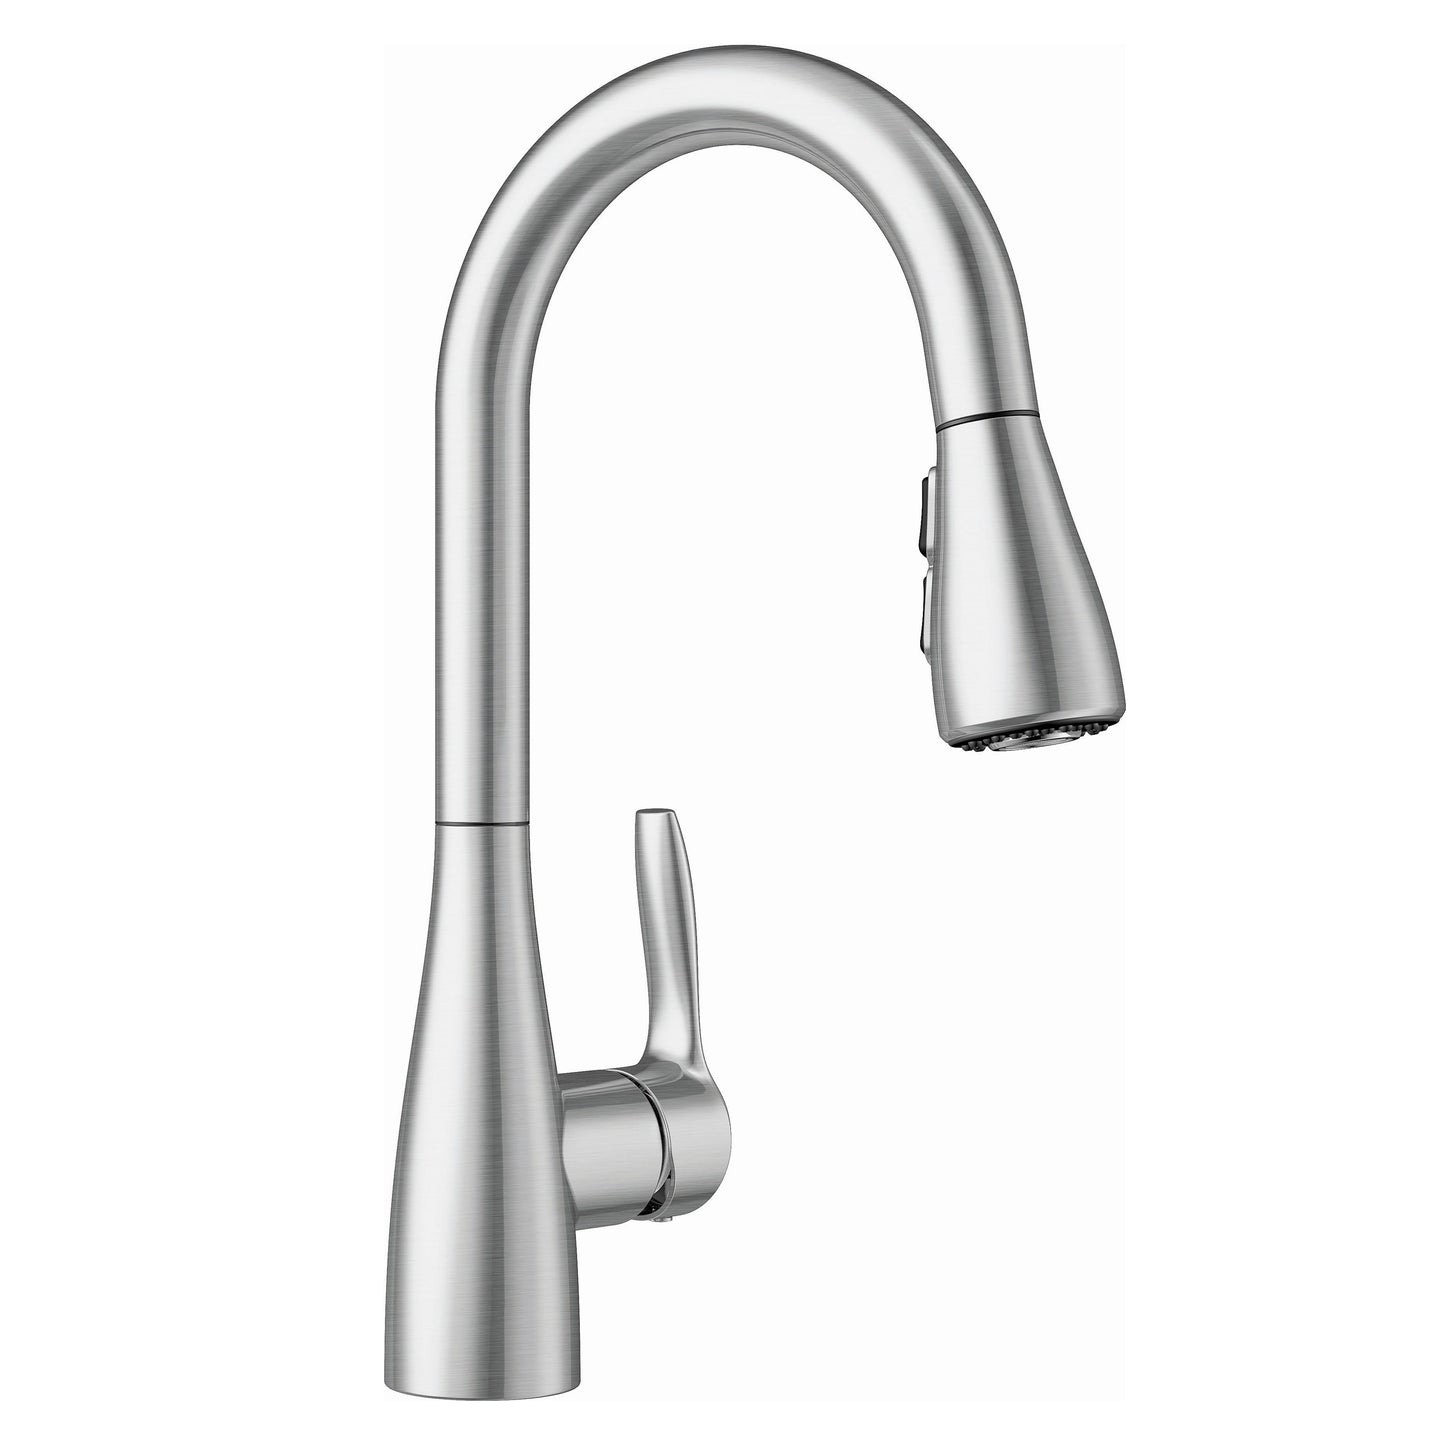 Atura Bar Pull Down 1.5 gpm - Stainless